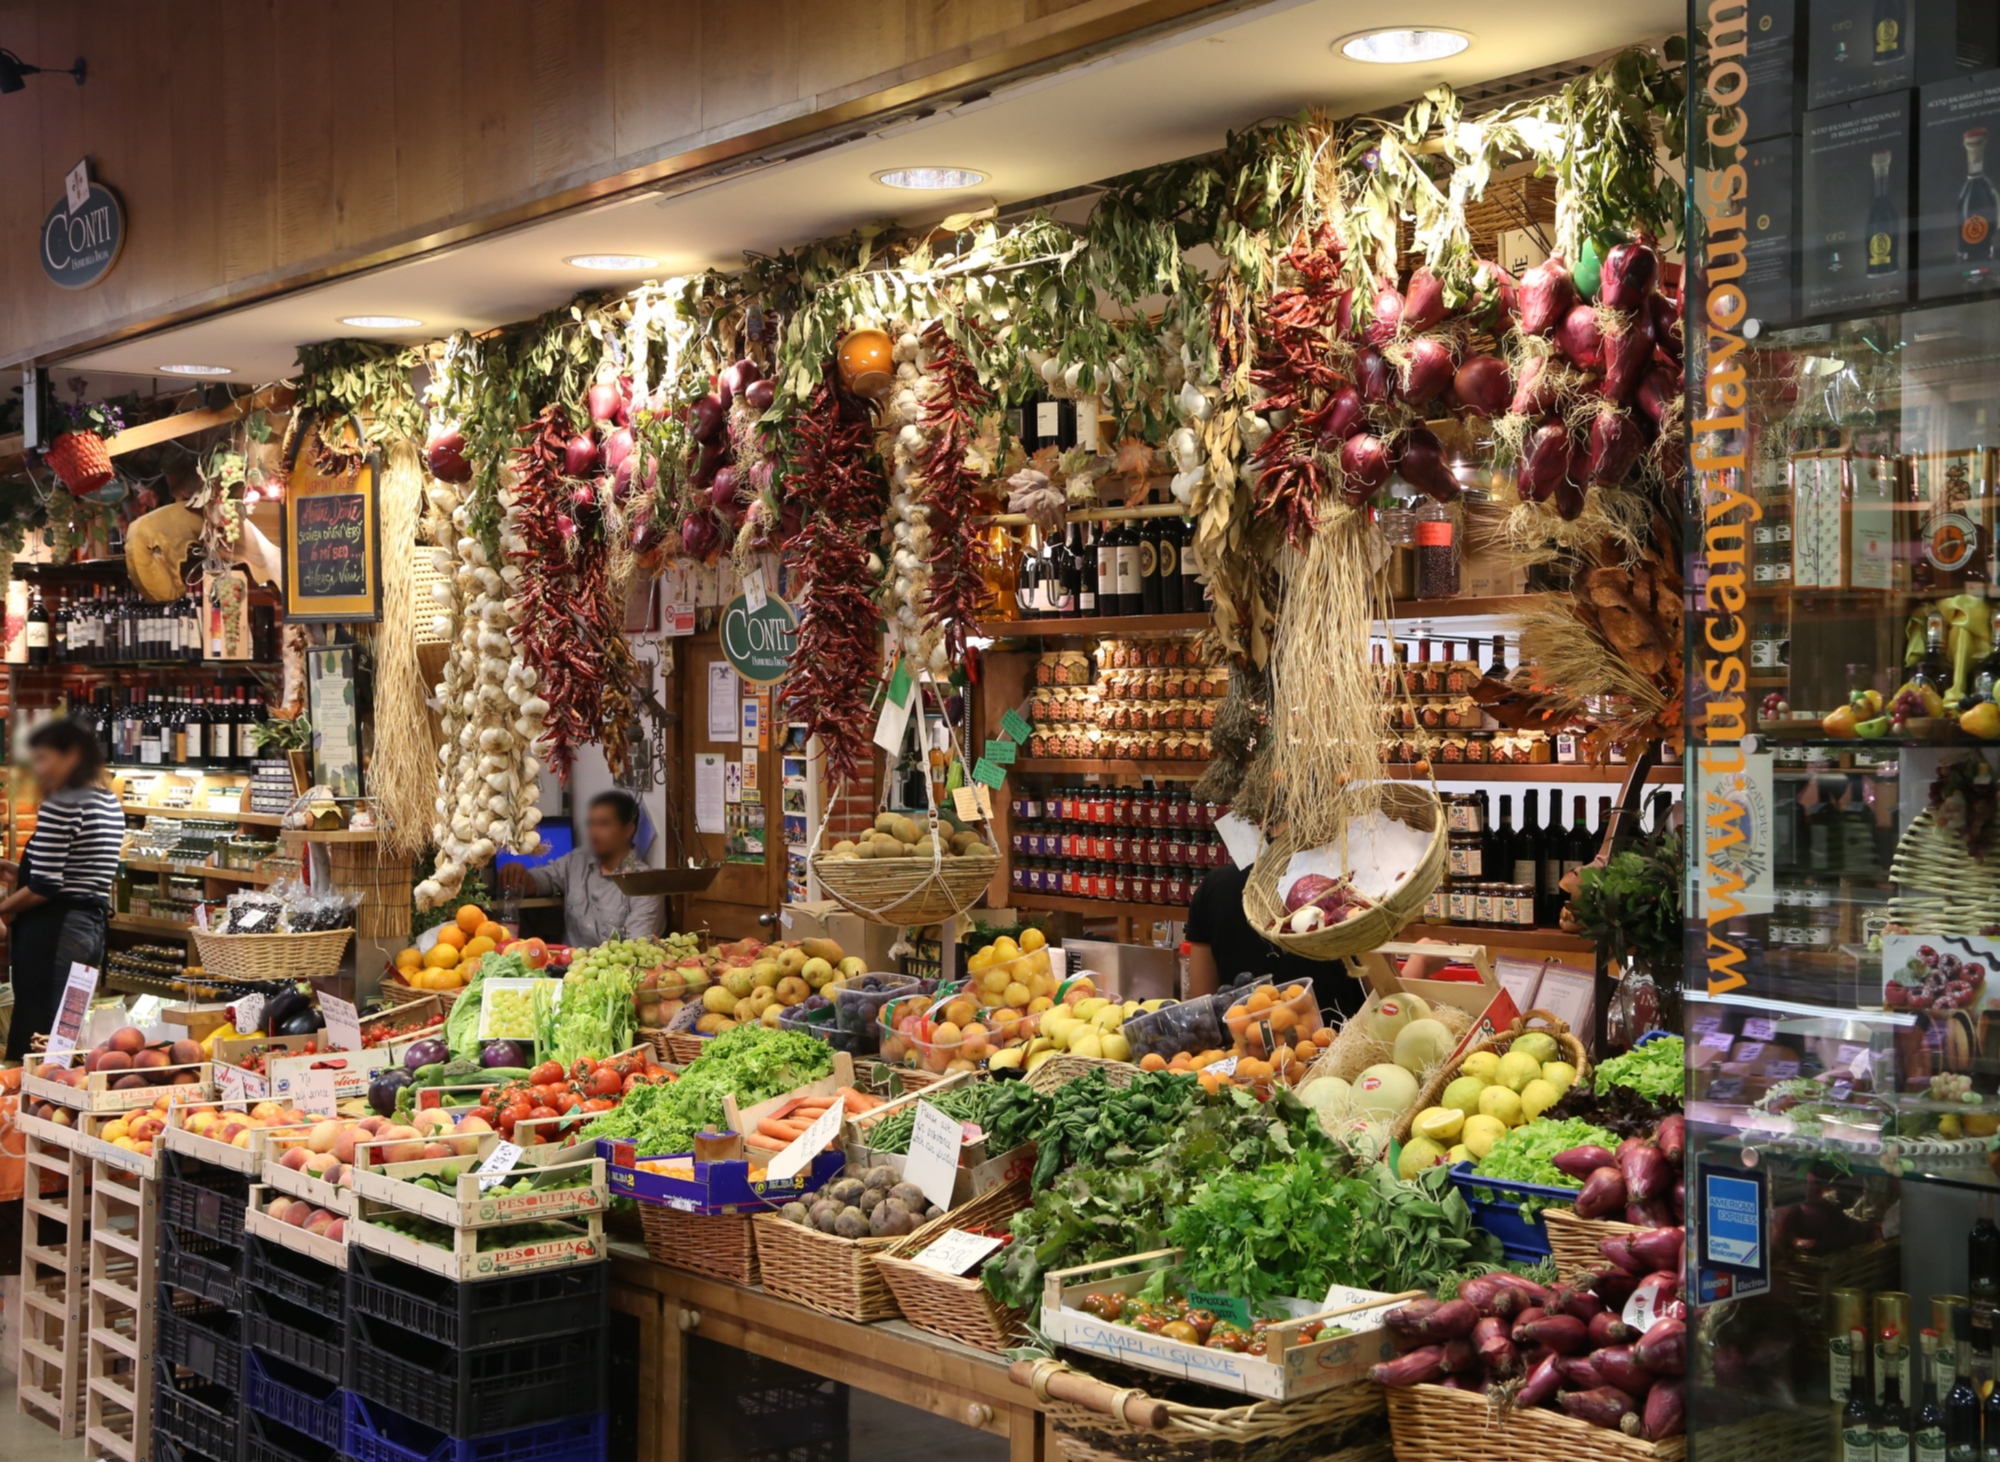 Central Market of San Lorenzo in Florence